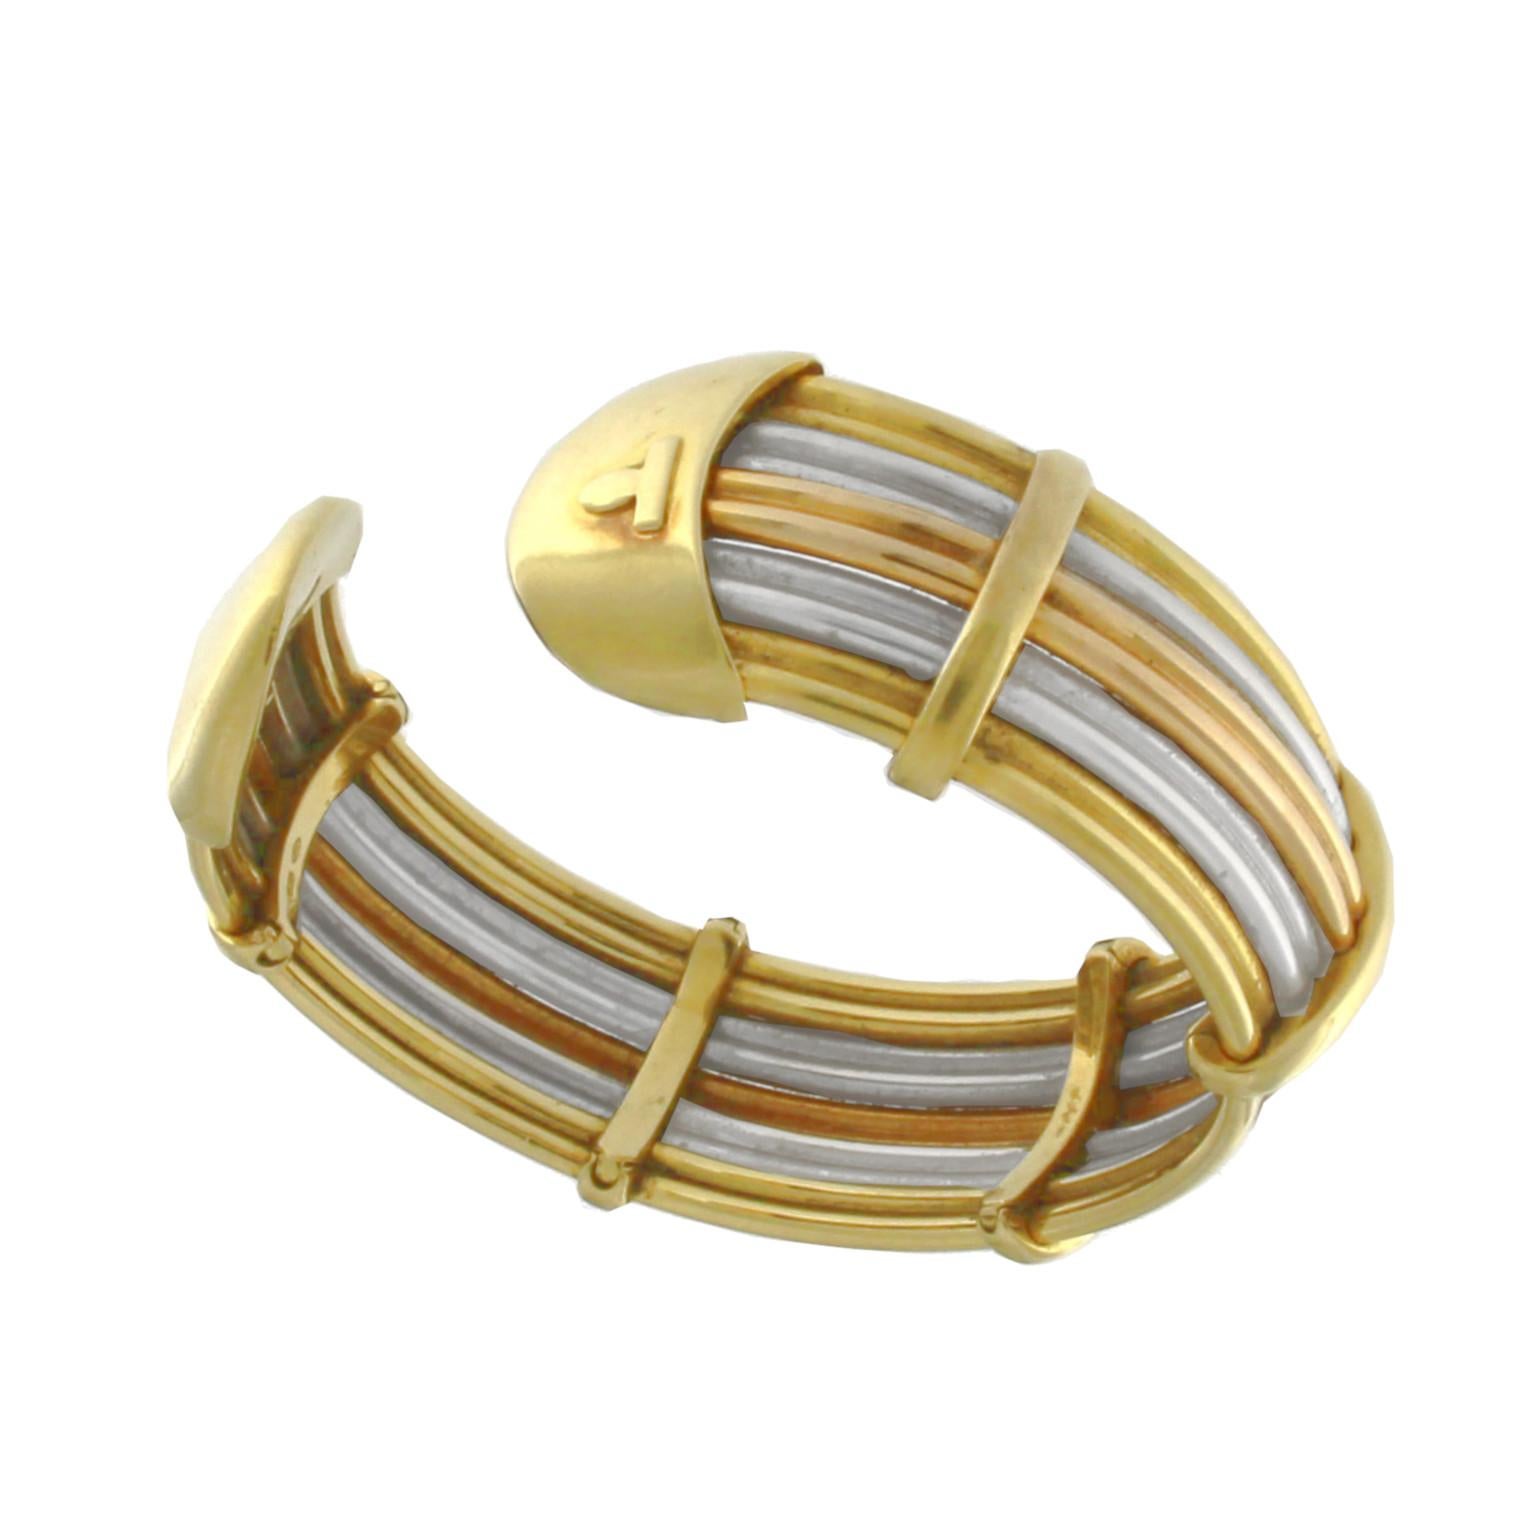 Flexible cuff bracelet made with straws of gold in the three colors, joined by simple yellow gold bounding sticks .
The reports are dry-mounted to allow the rods to flow inside so as to make the bracelet flexible and wearable.
The total weight of